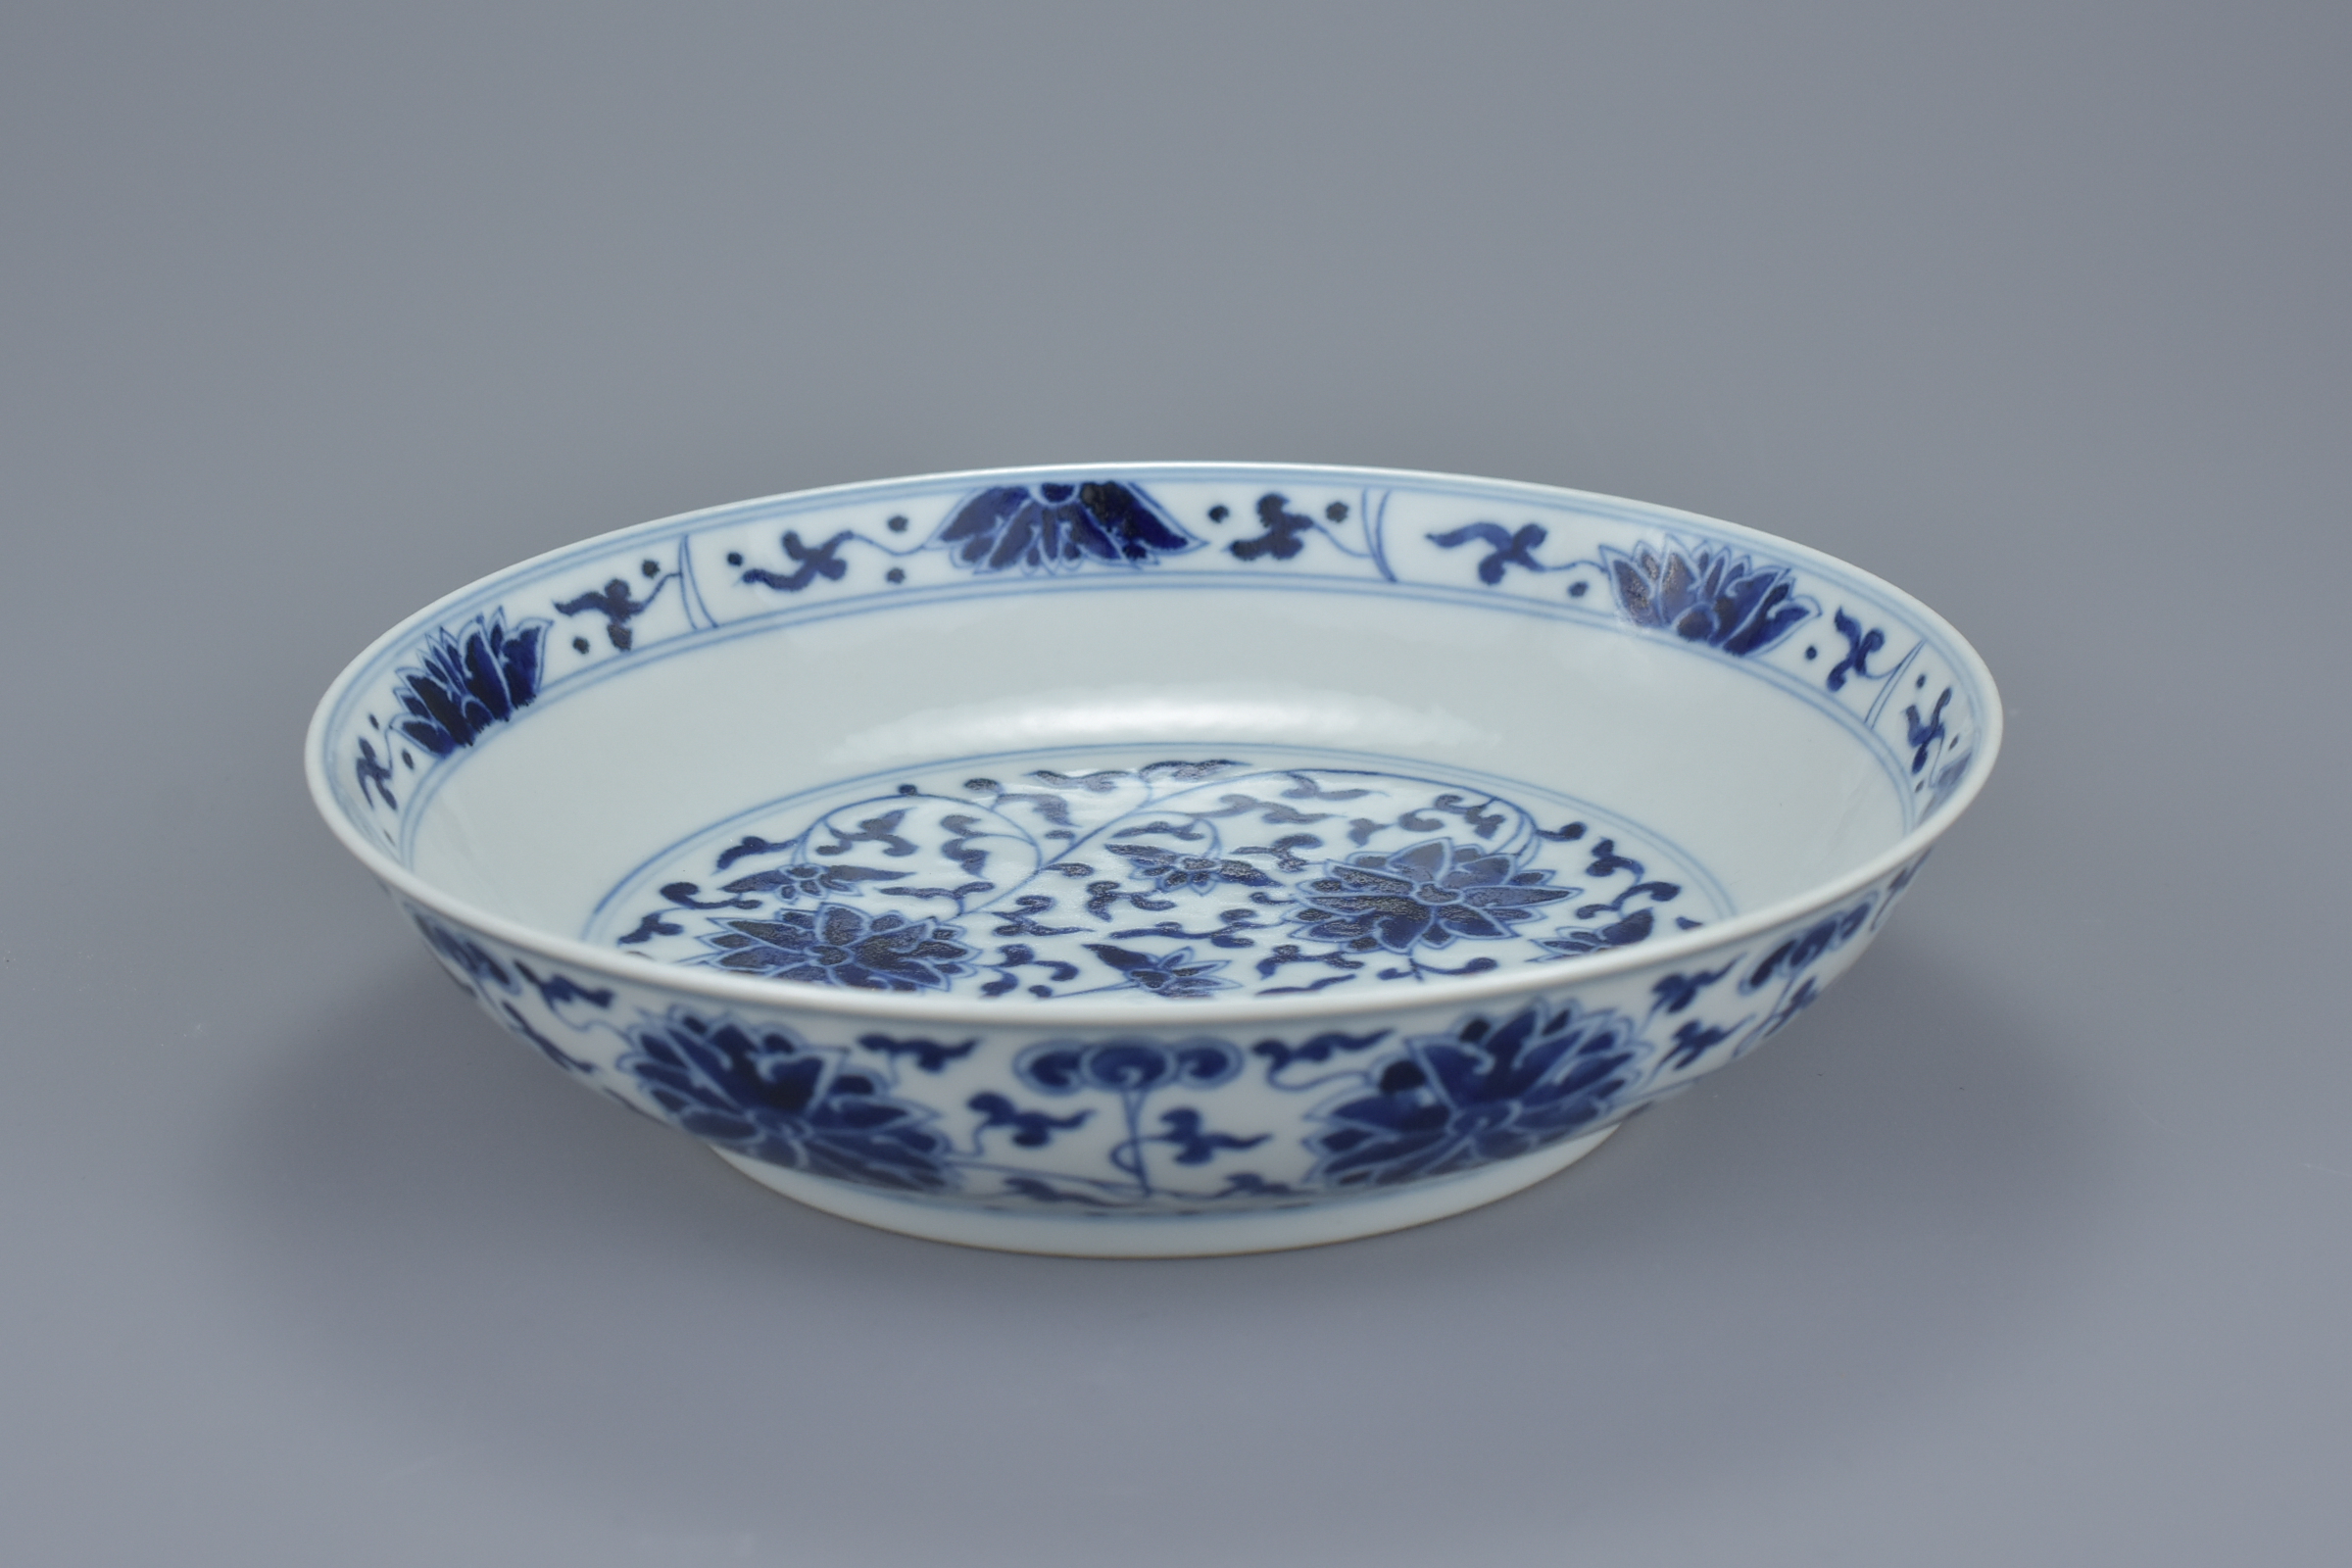 A Chinese late 19th century blue and white porcelain dish with floral lotus, chrysanthemum and peony - Image 6 of 6